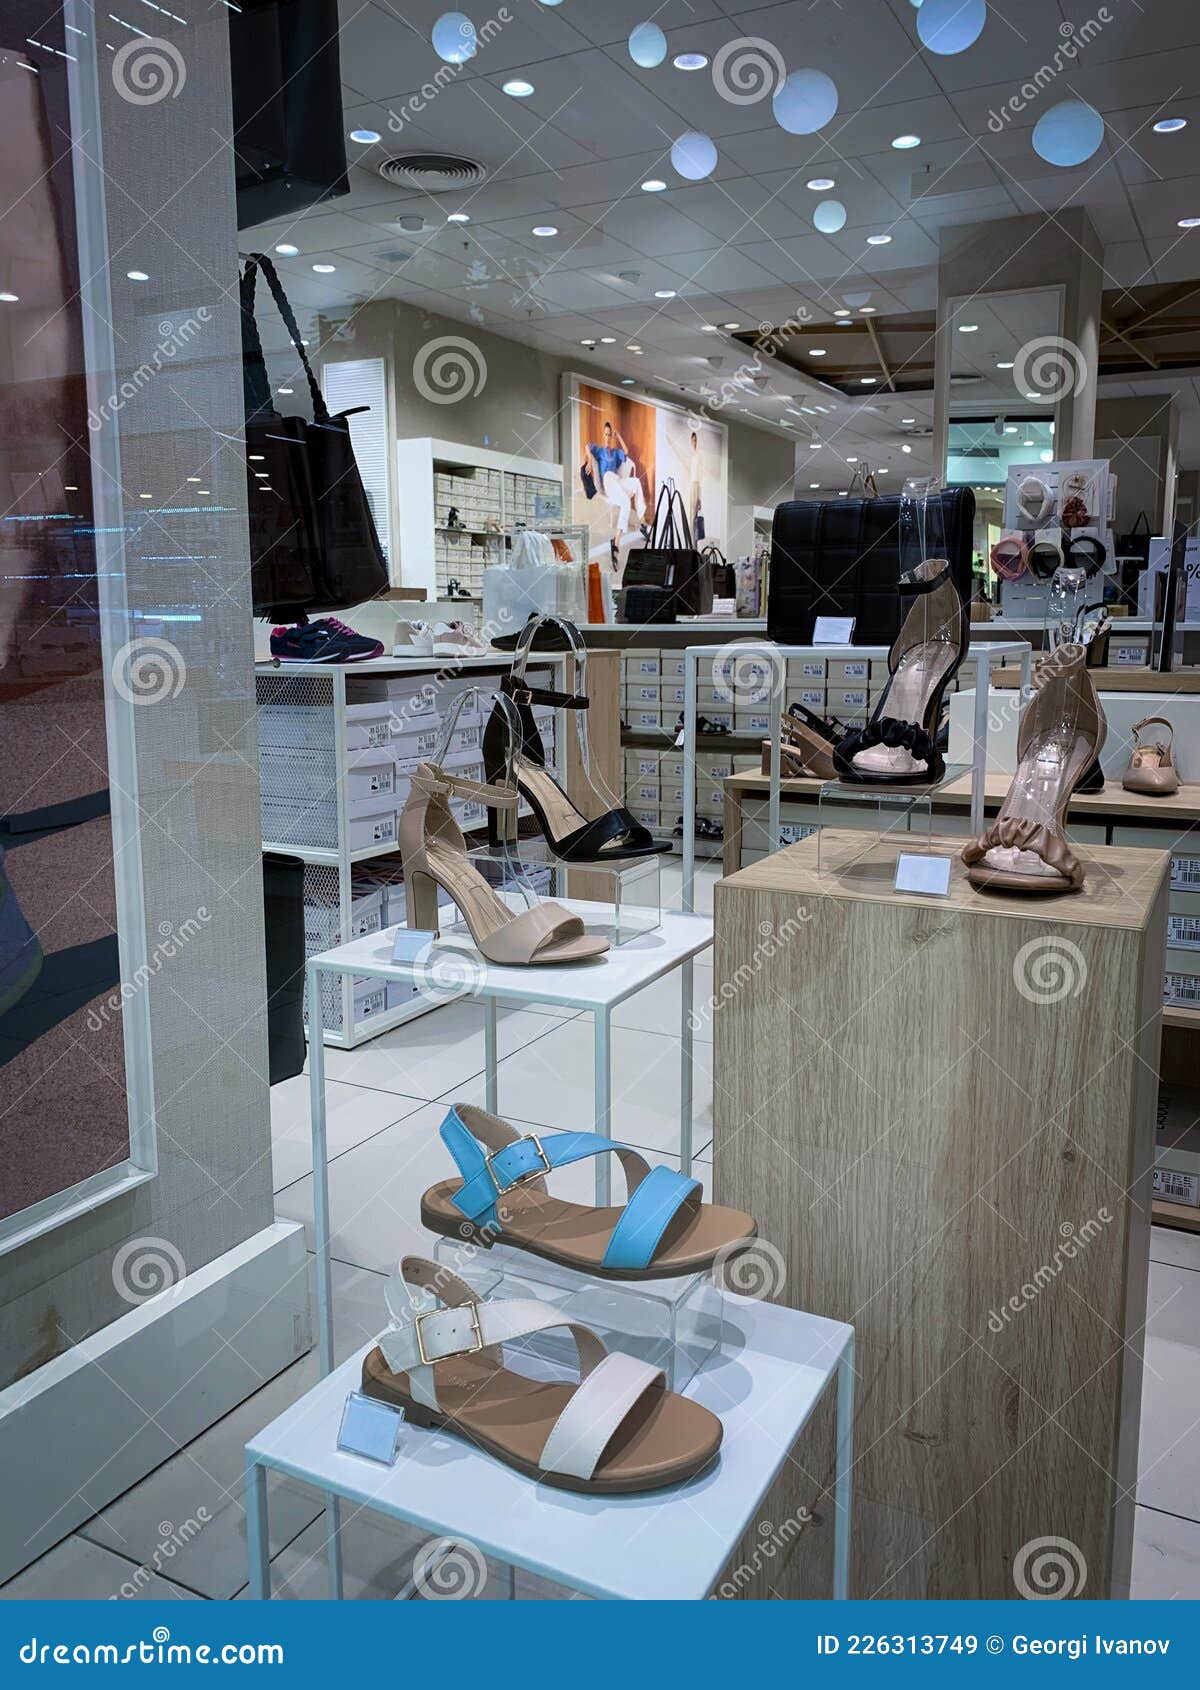 Shoe Store Window Display in a Shopping Mall. Stock Image - Image of ...